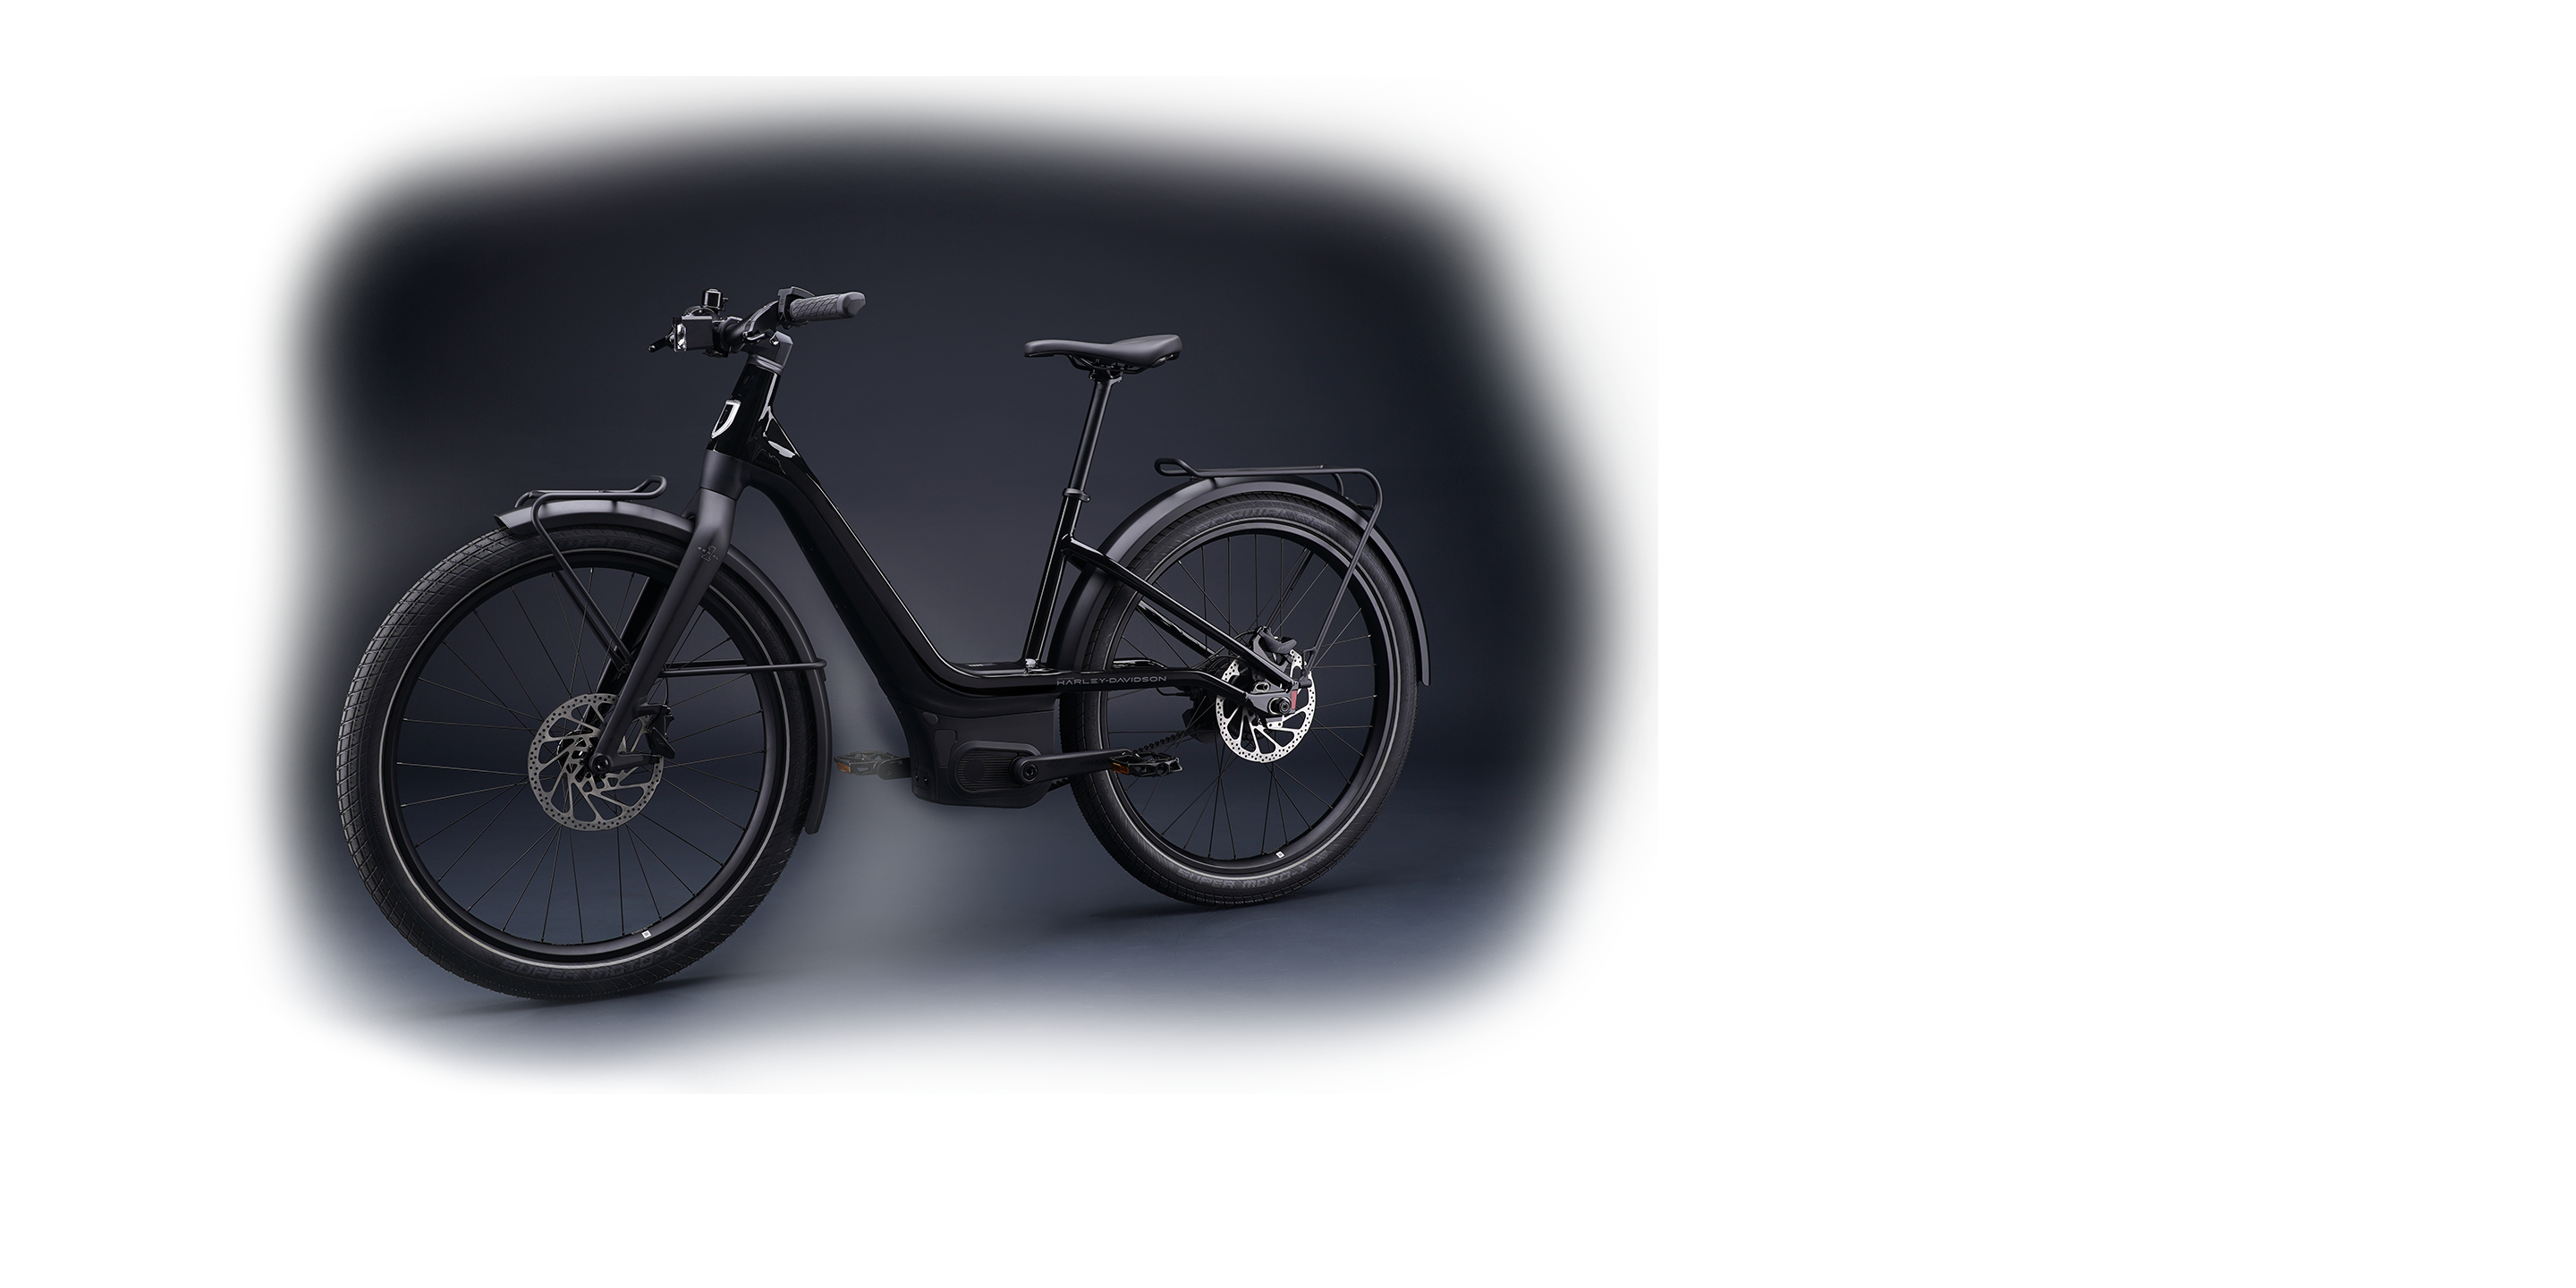 Serial 1 Cycle Company Powered by Harley-Davidson eBicycles